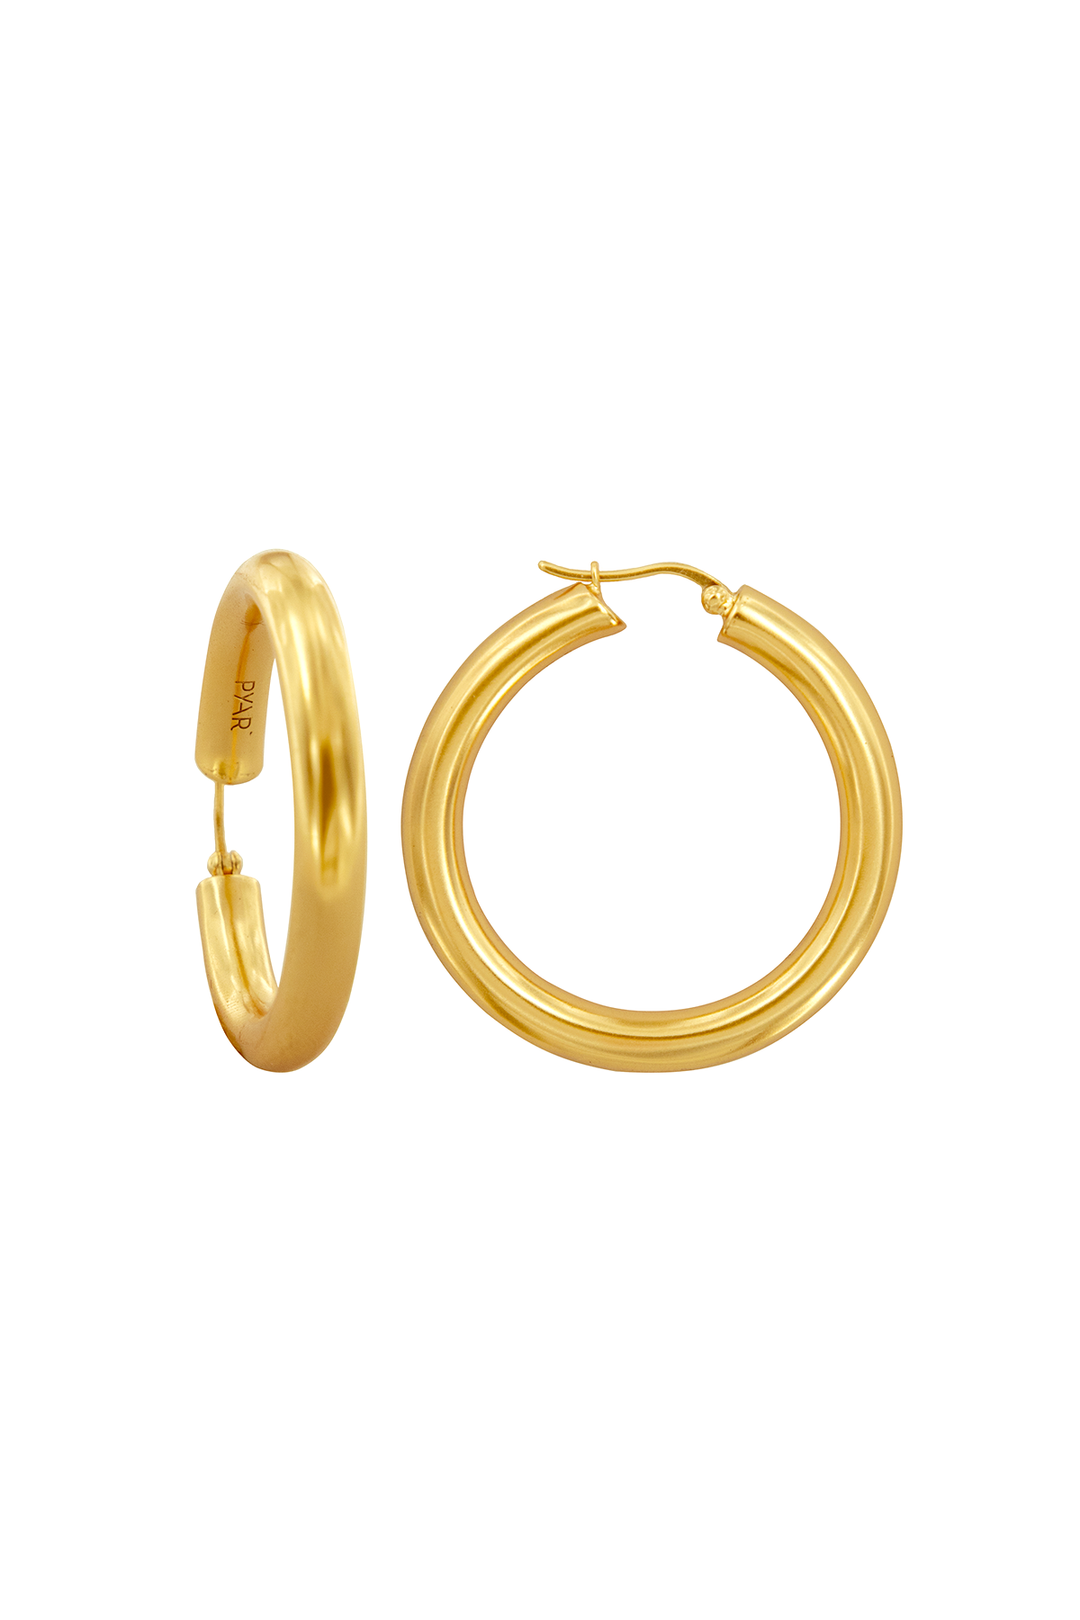 Side view of Pyar Jupiter Gold Hinged Hoop Earrings, available on ZERRIN with free shipping in Singapore